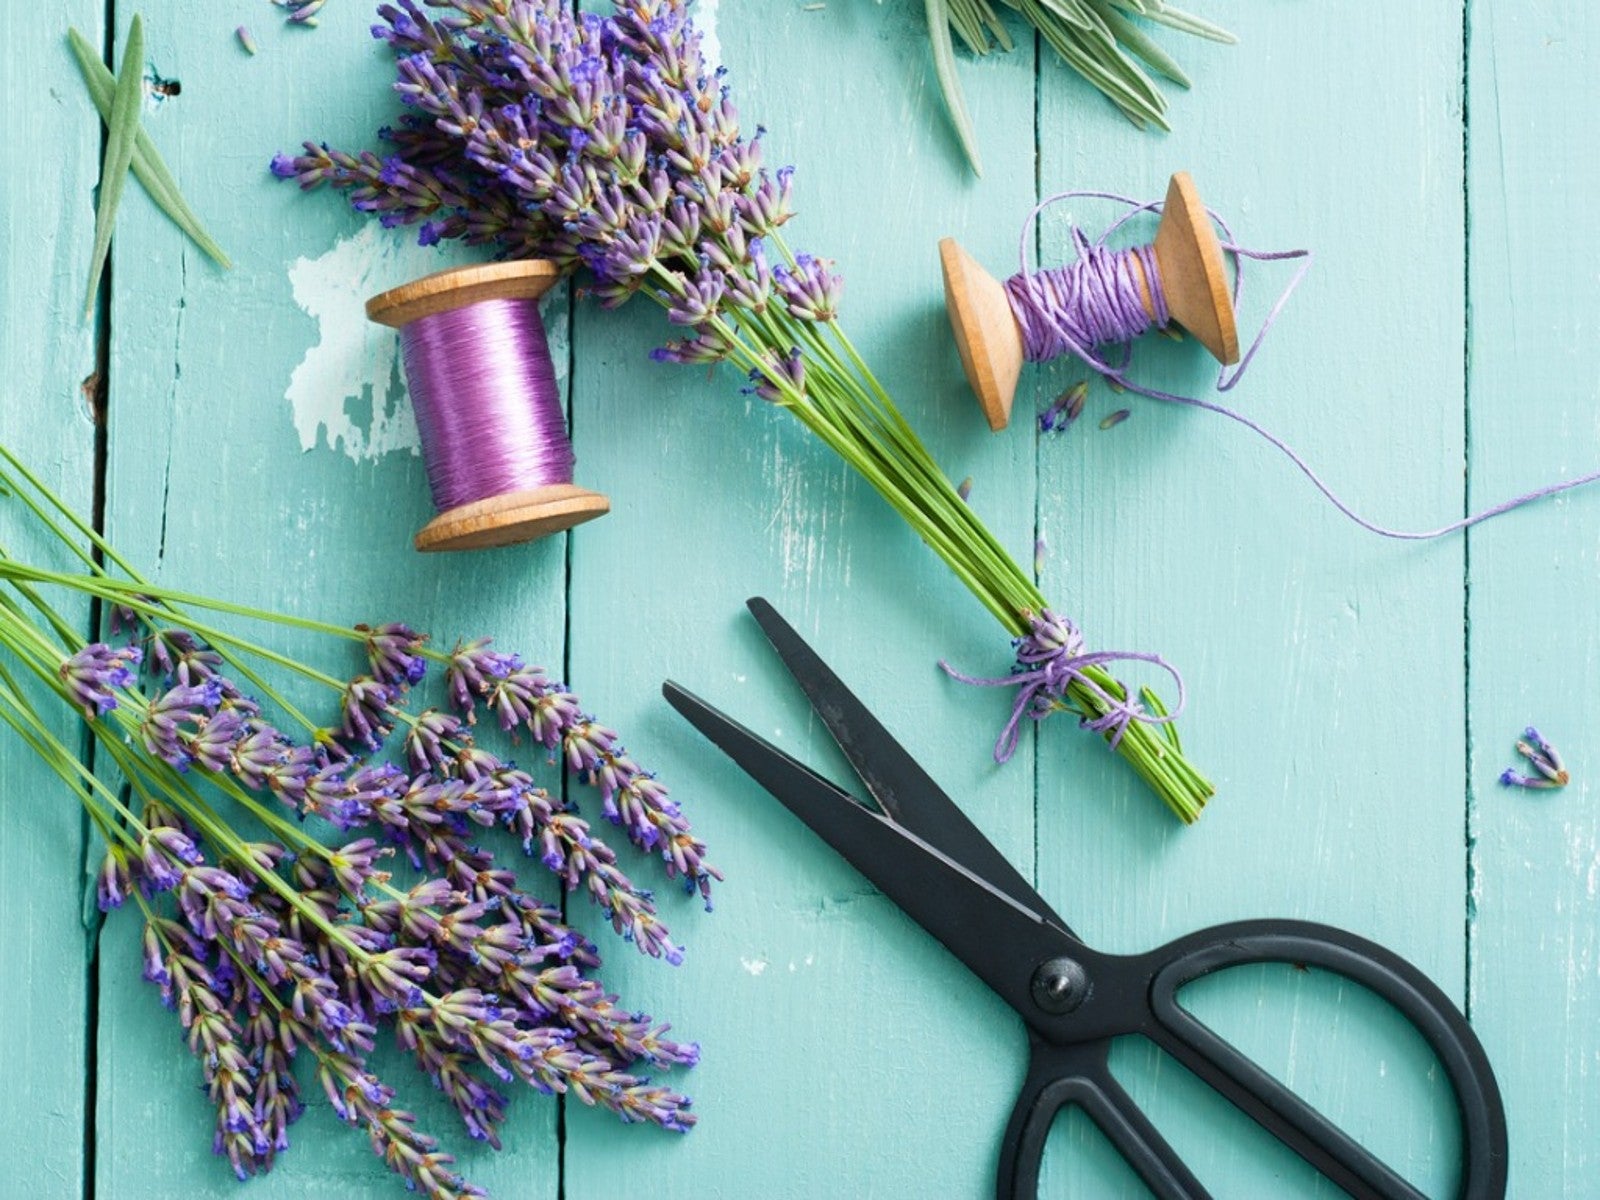 How To Use Lavender For DIY Projects